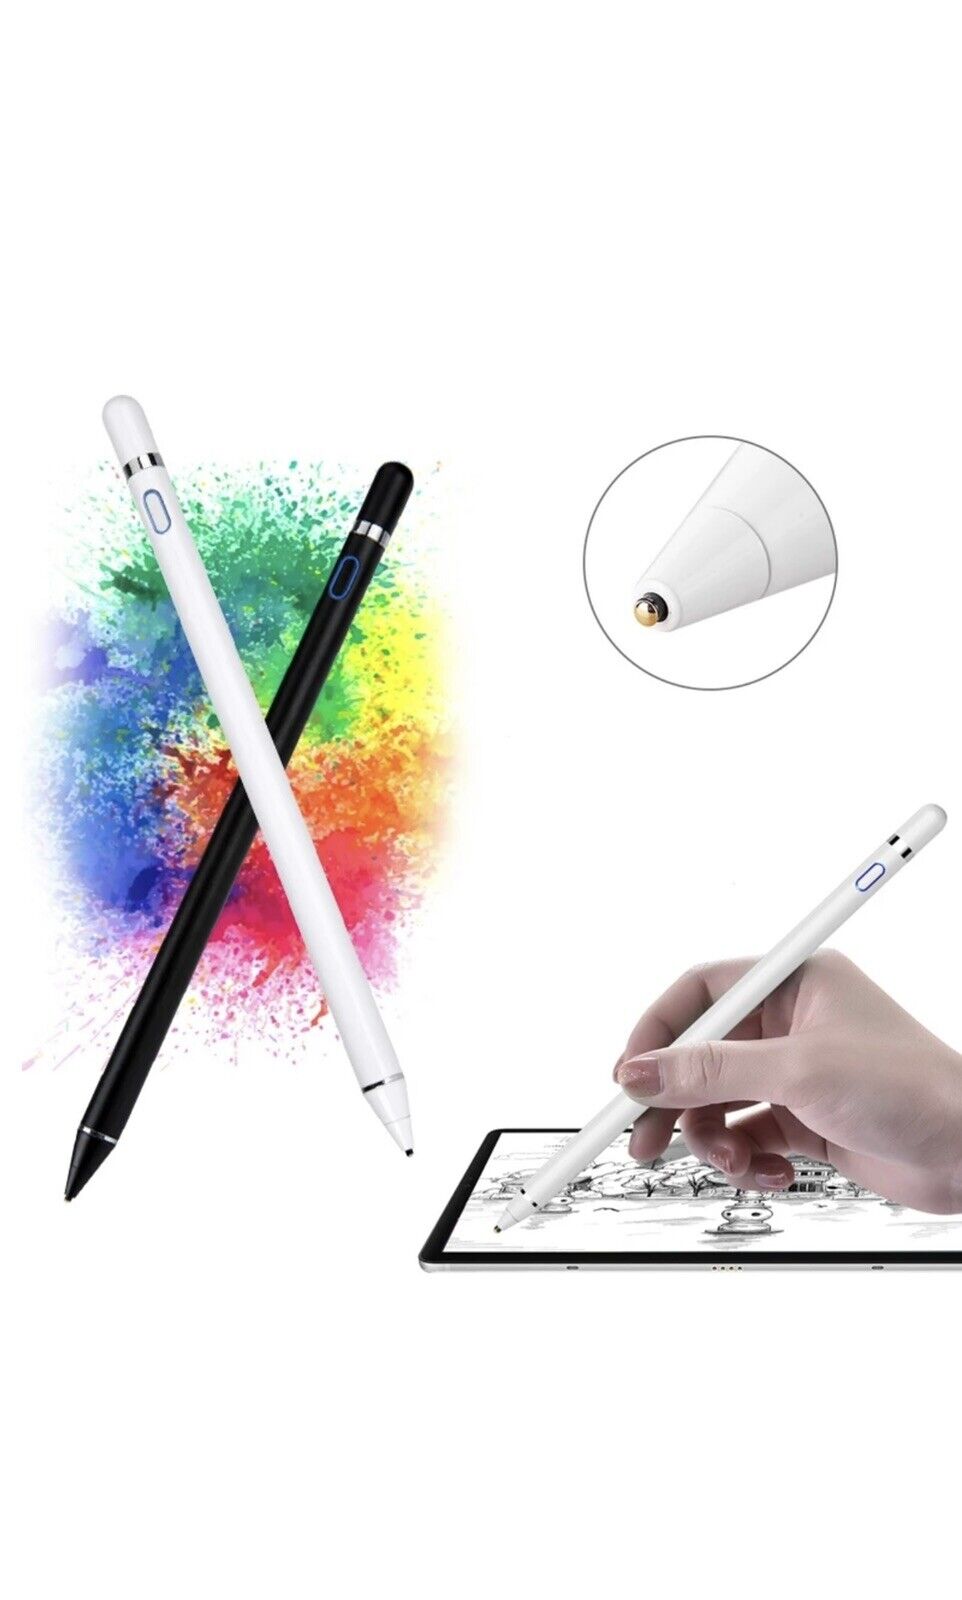 STYLUS PEN FOR TOUCH SCREENS DIGITAL ACTIVE PENCIL FINE POINT FOR IPHONE IPAD